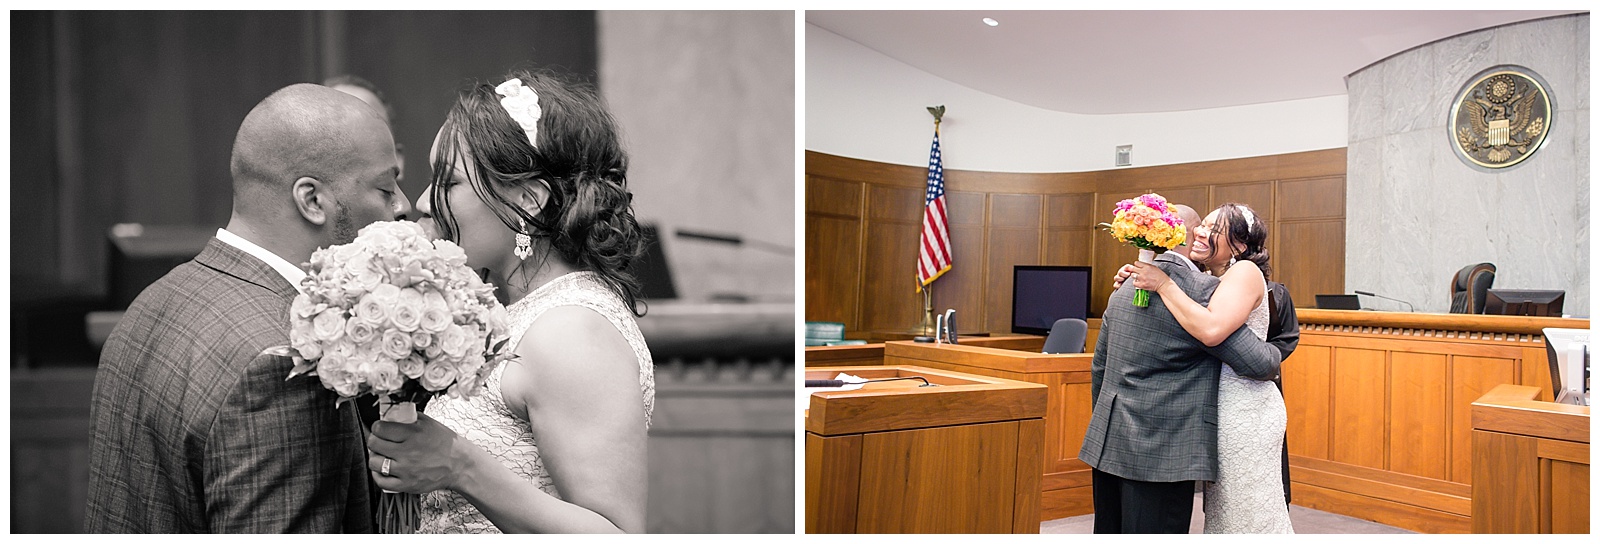 Elopement photography at the Charles Evans Whittaker United States Courthouse in Kansas City.